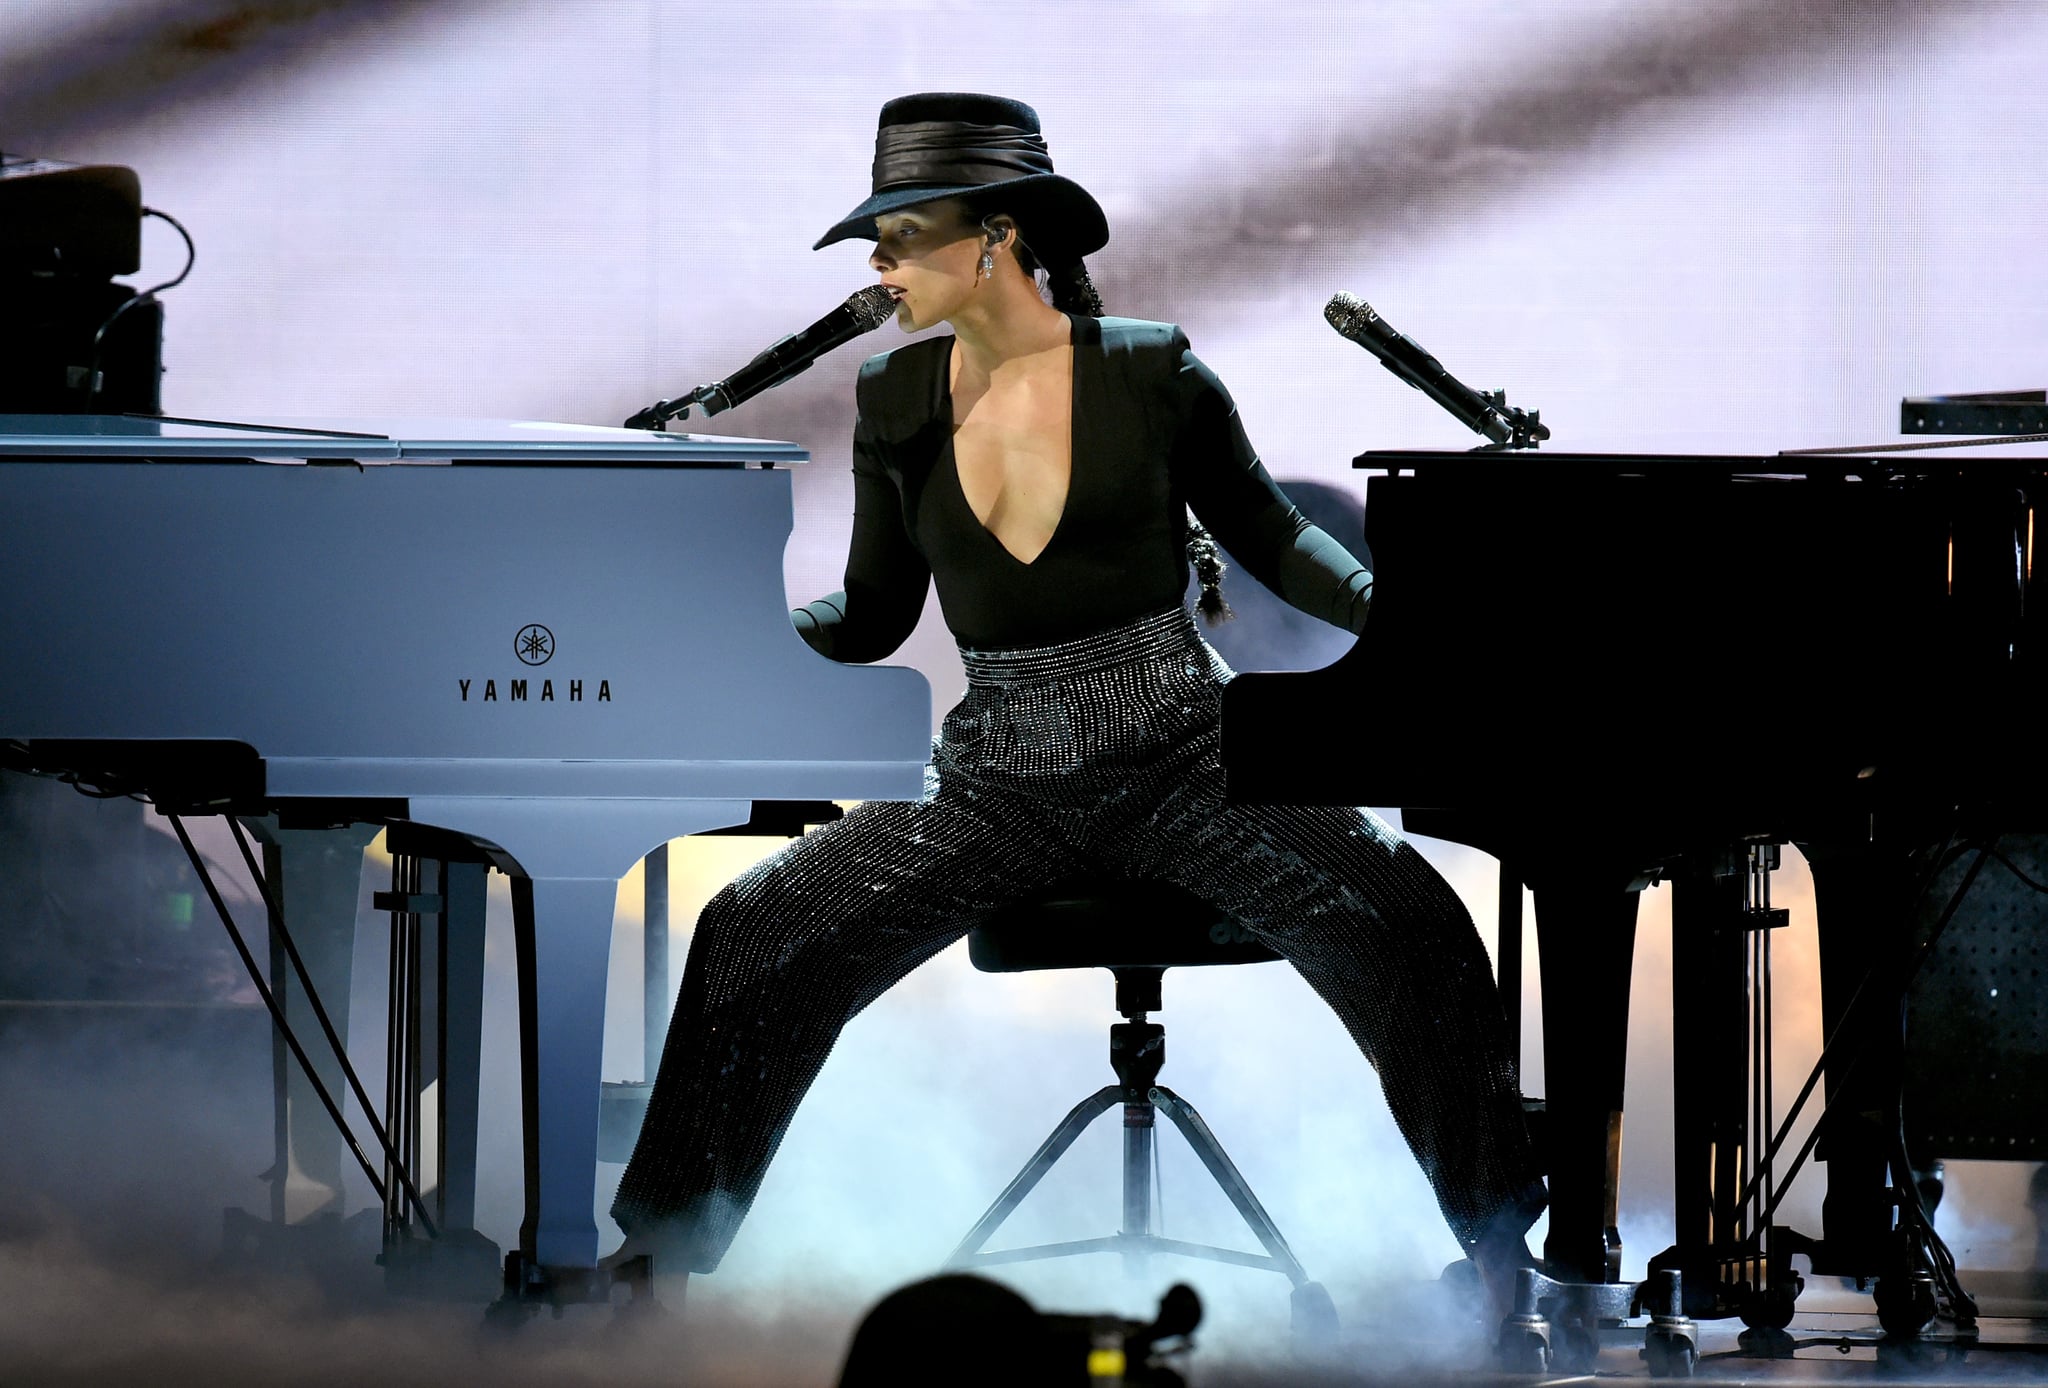 Alicia Keys played two pianos at the same time during her 2019 performance.